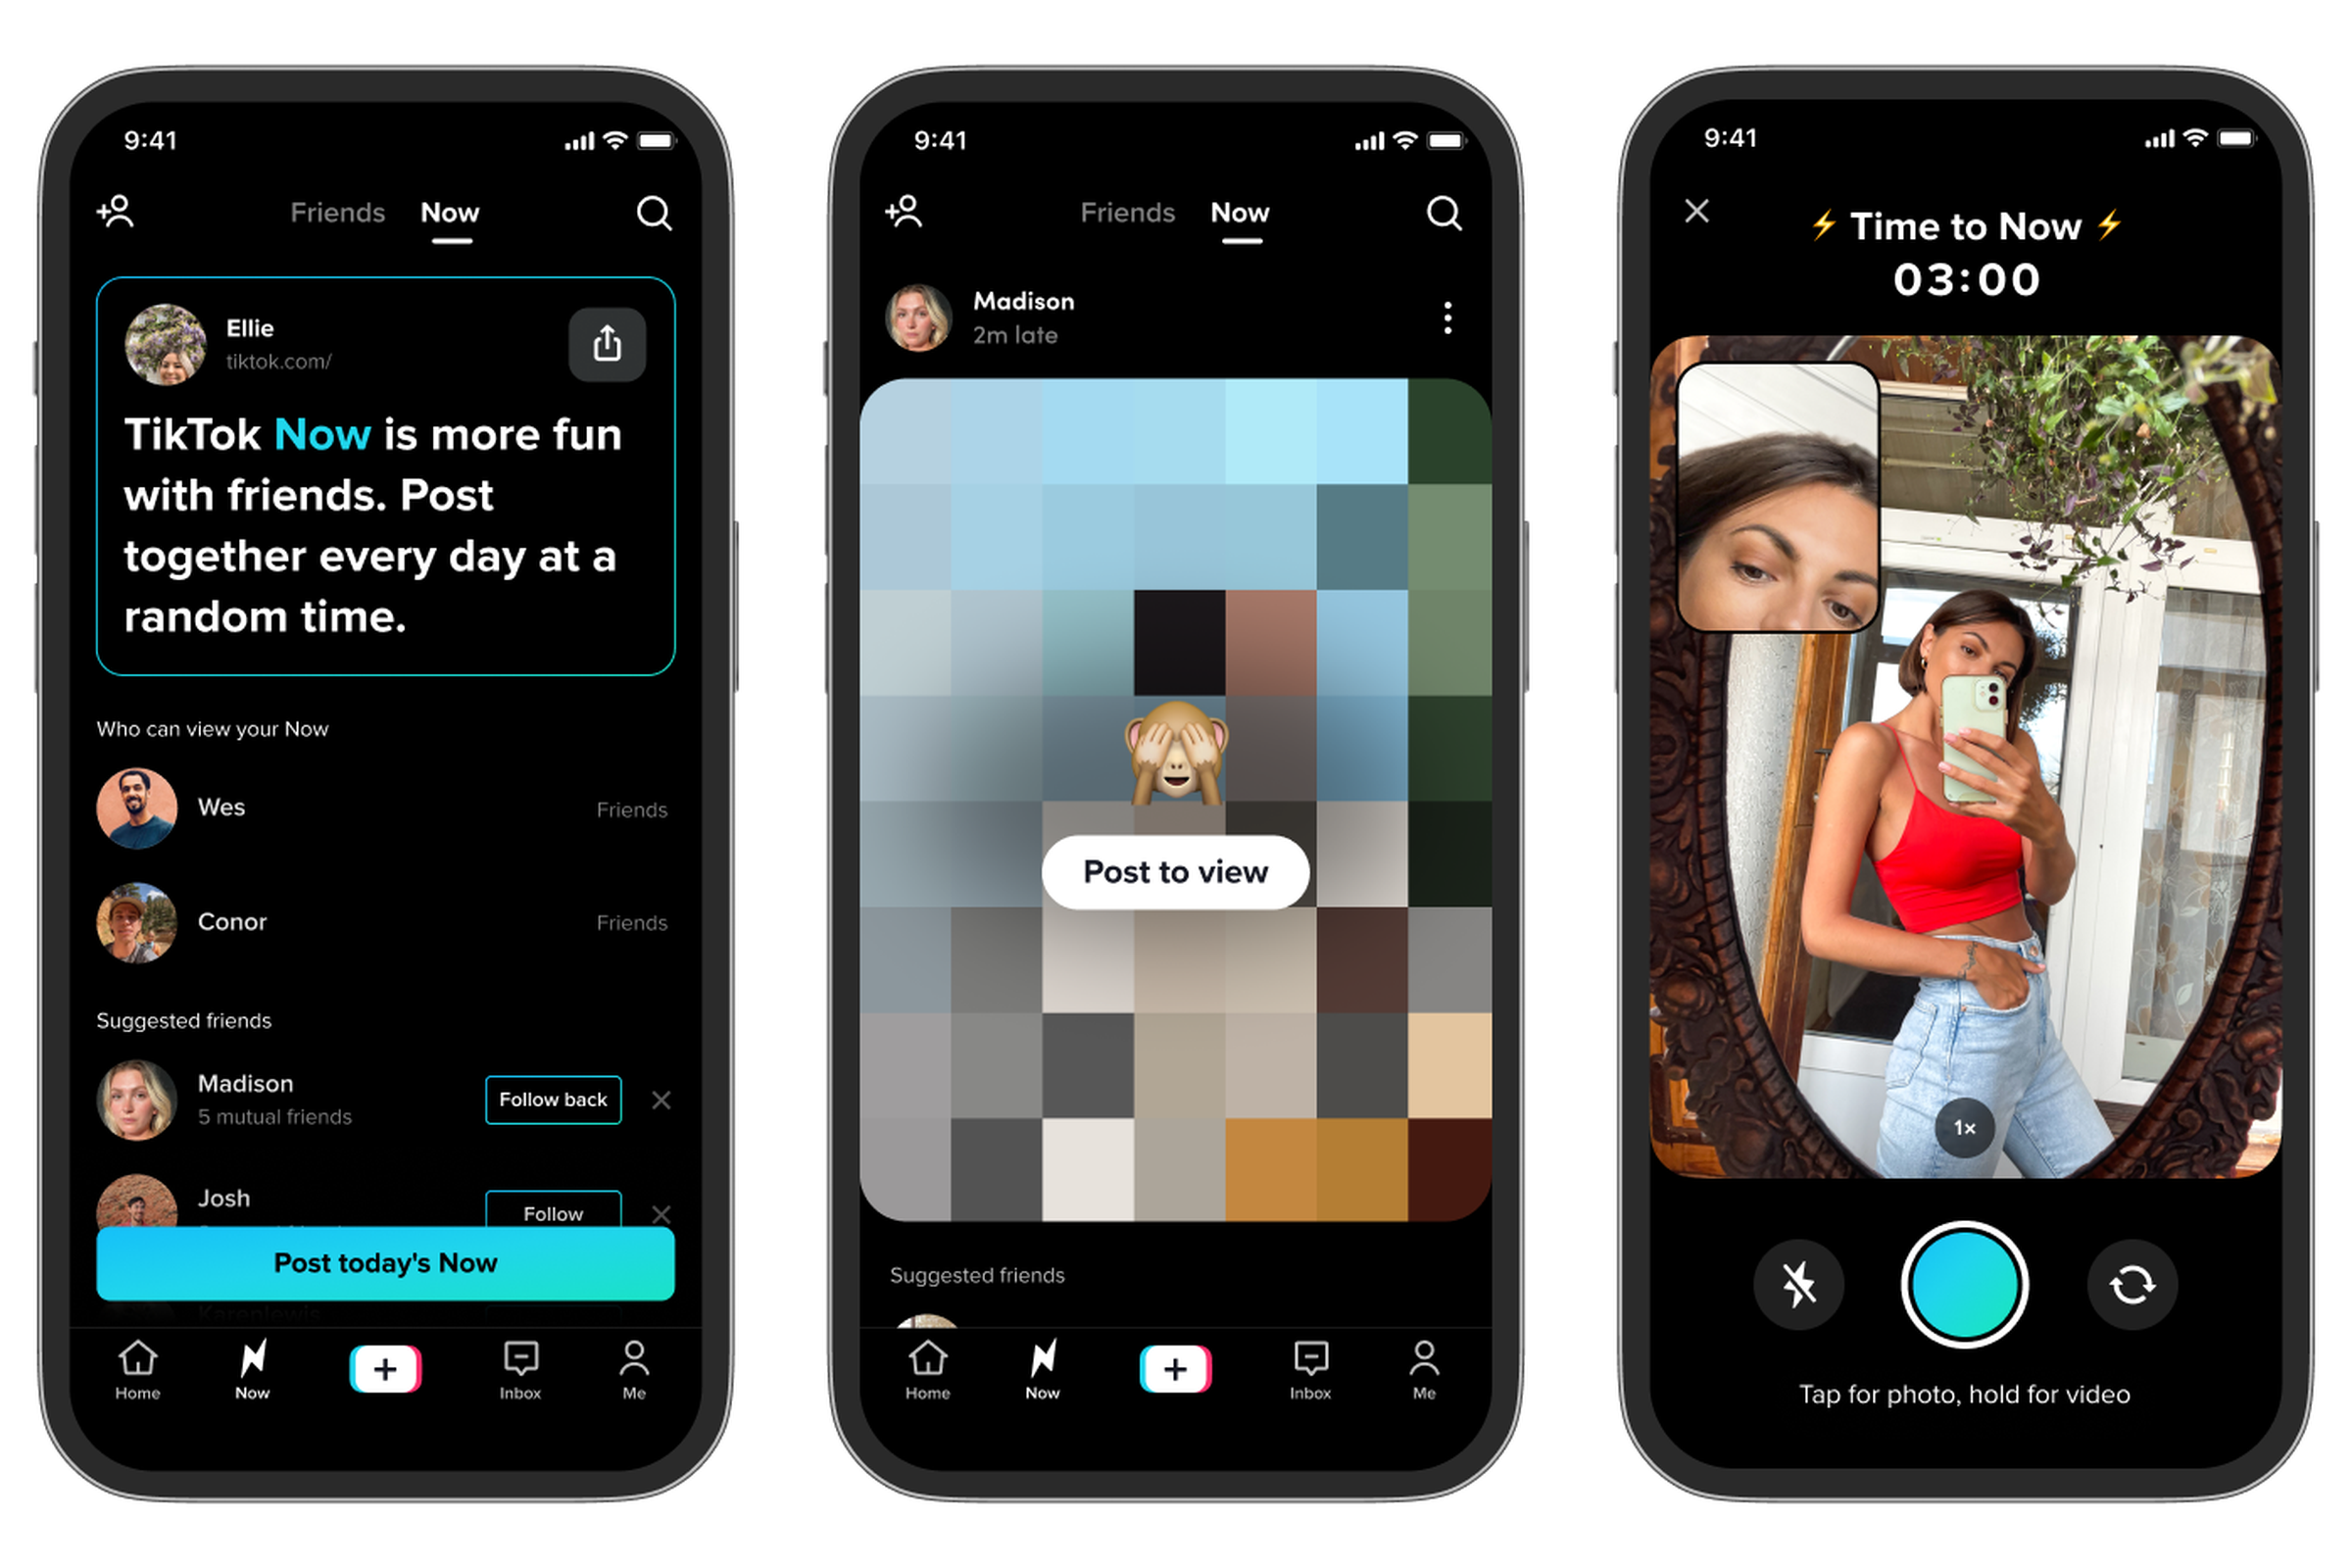 TikTok screens of its new feature show notifications to post and dual camera pictures shared by friends.